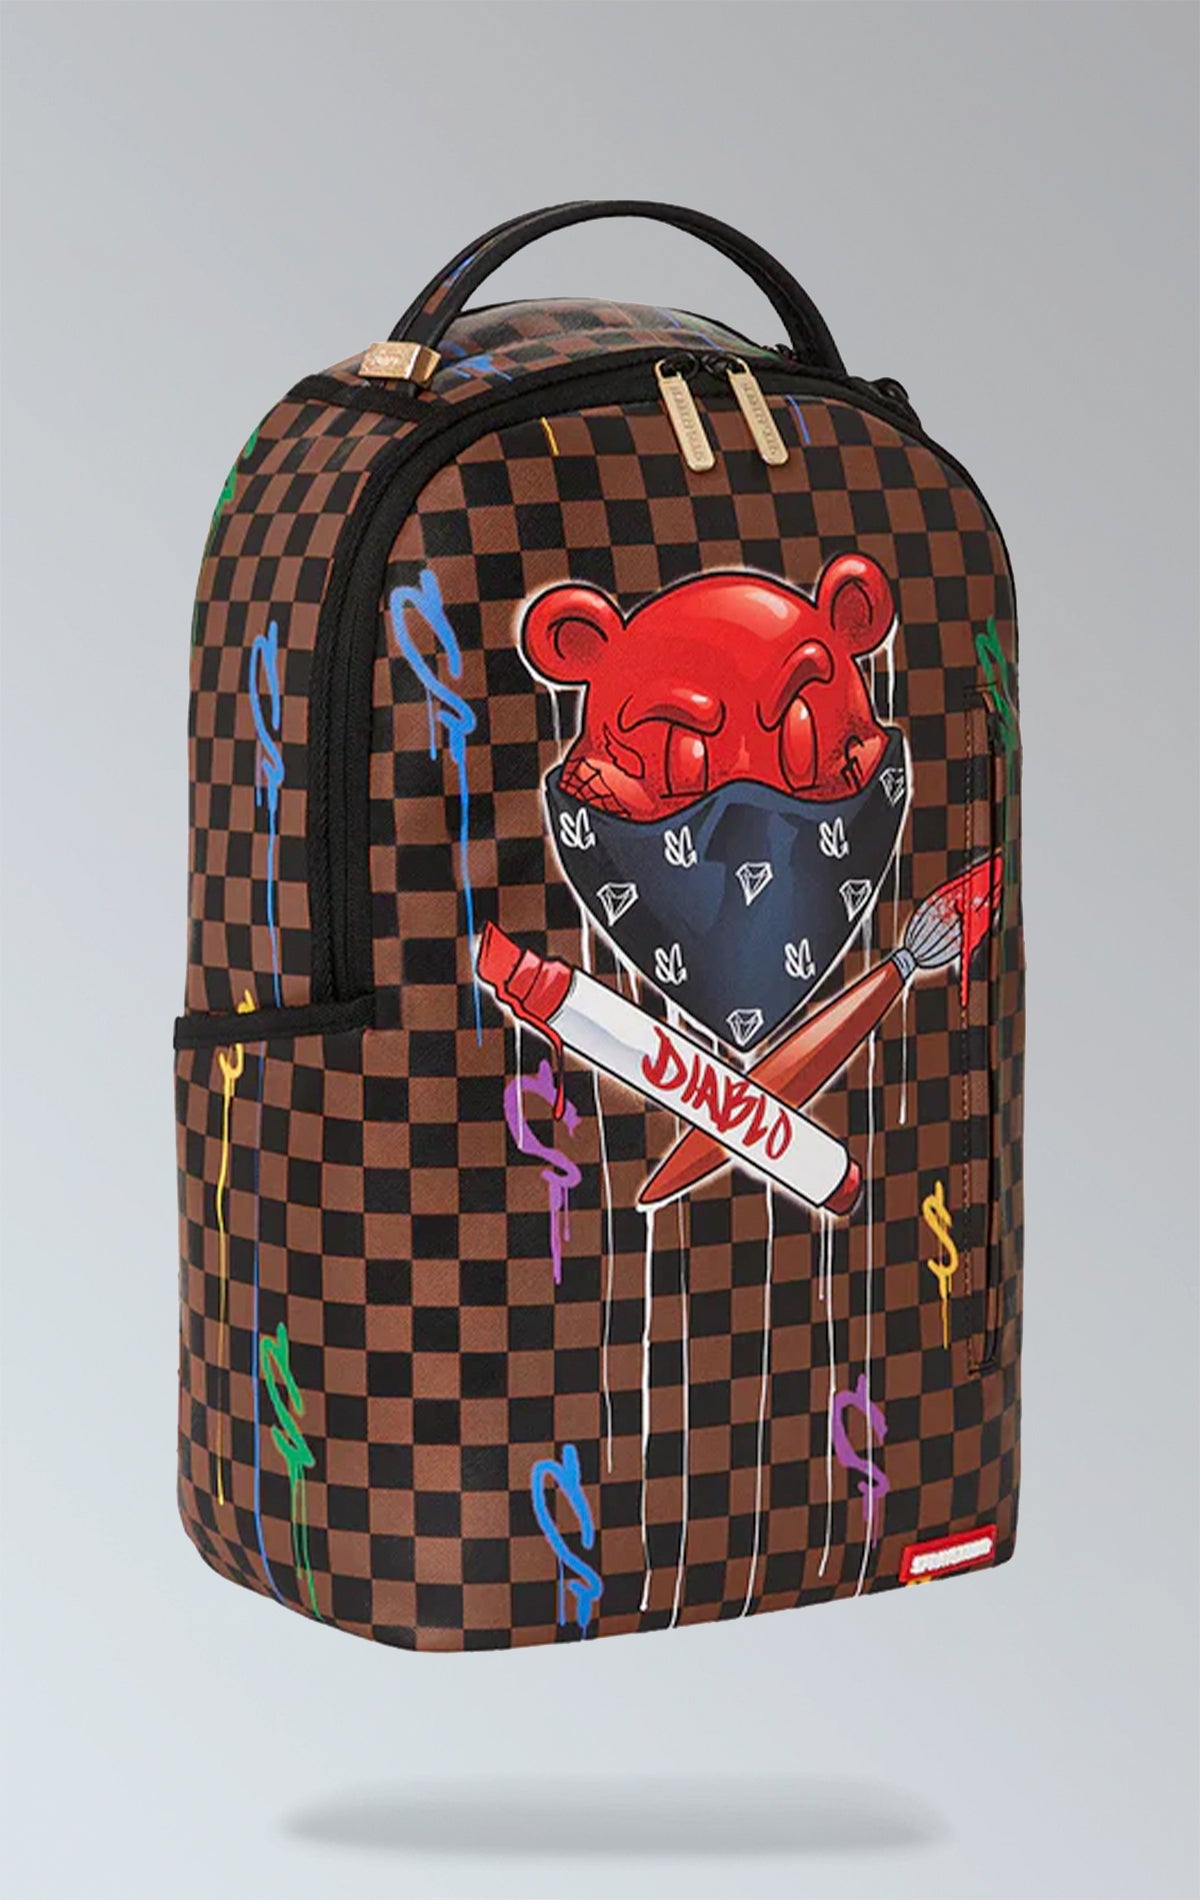 Sprayground fiery checkerboard backpack with mischievous bear mascot, perfect for rebellious spirits!